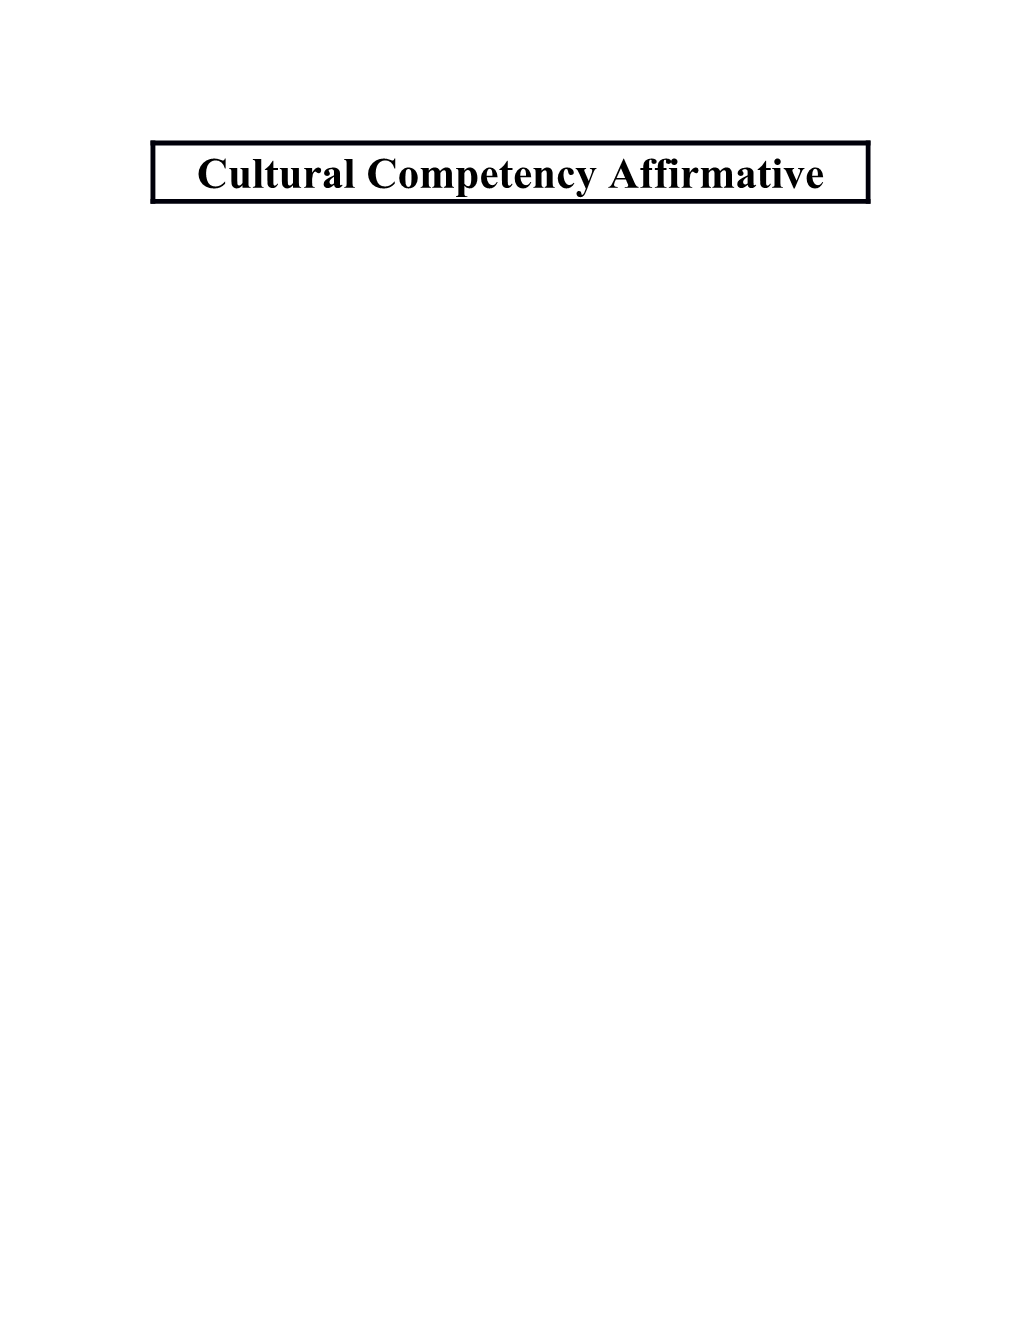 Cultural Competency Affirmative